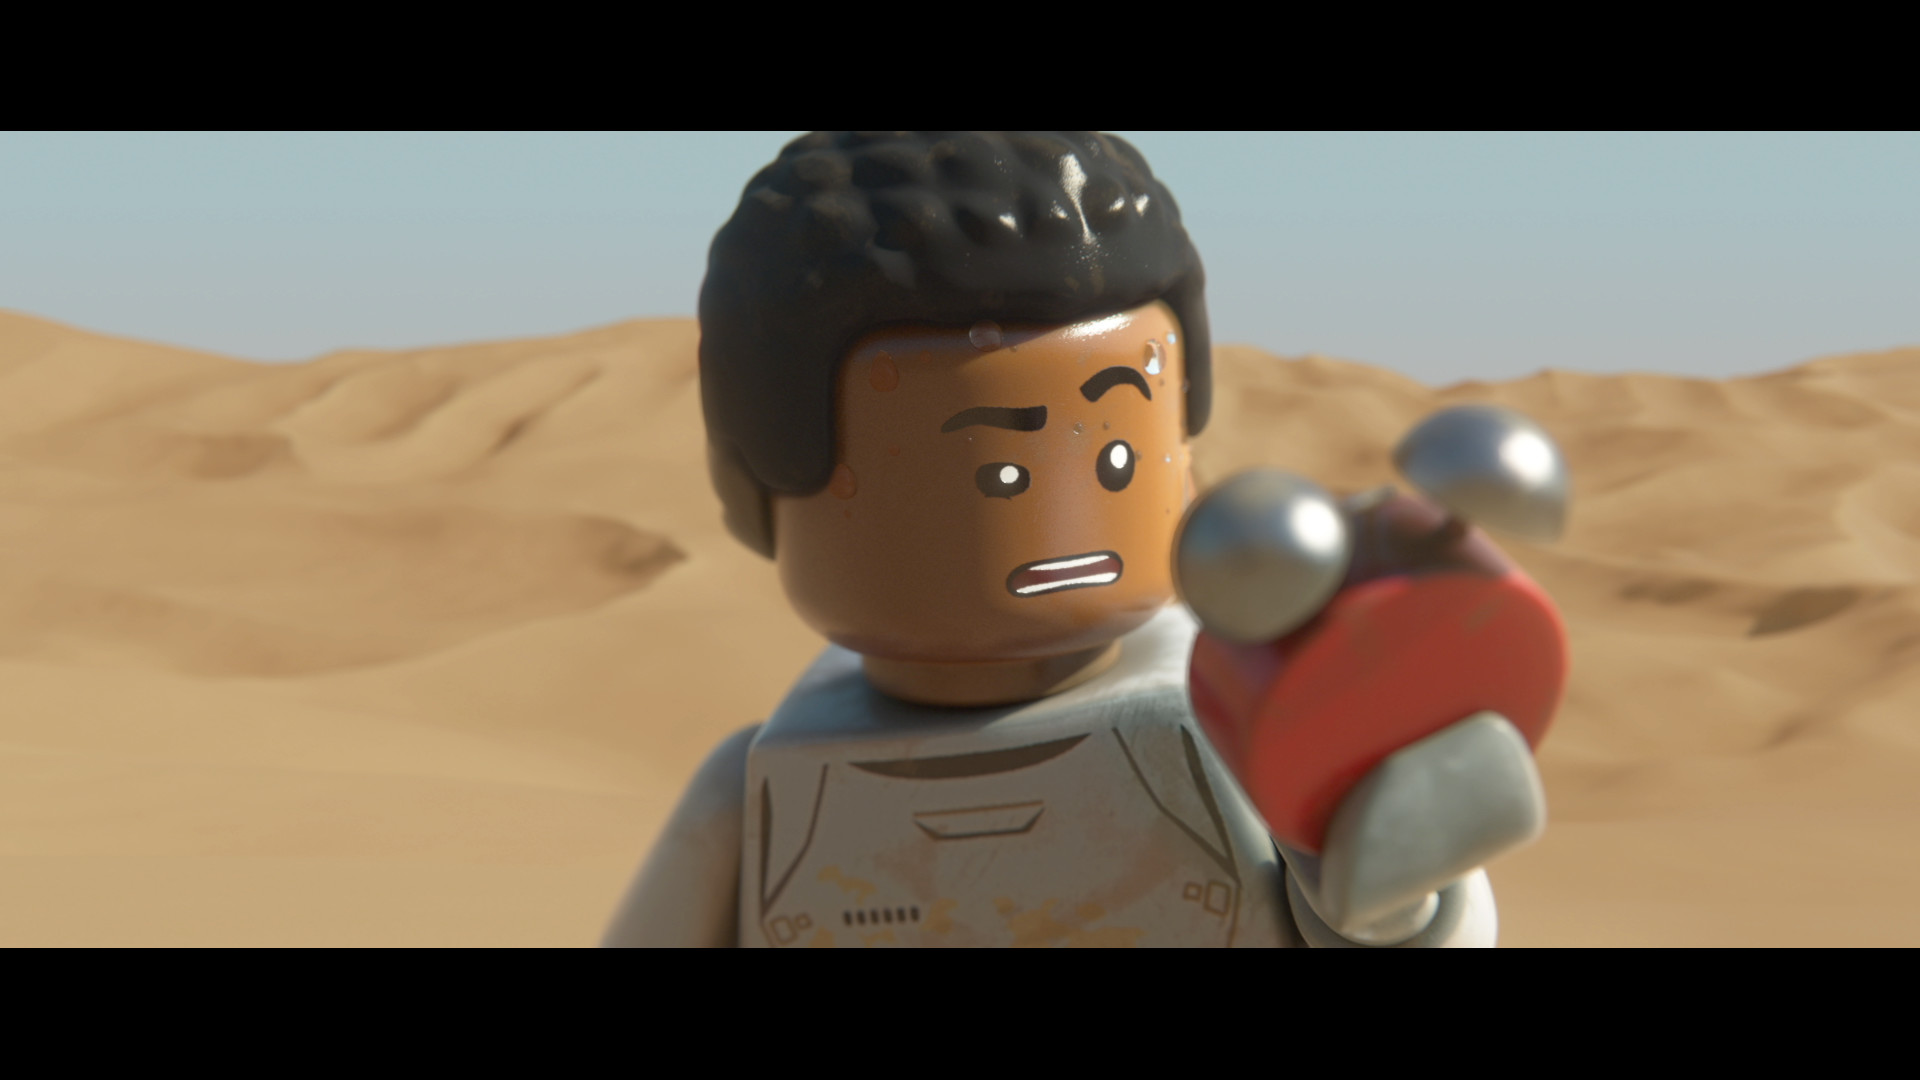 LEGO® STAR WARS™: The Force Awakens on Steam